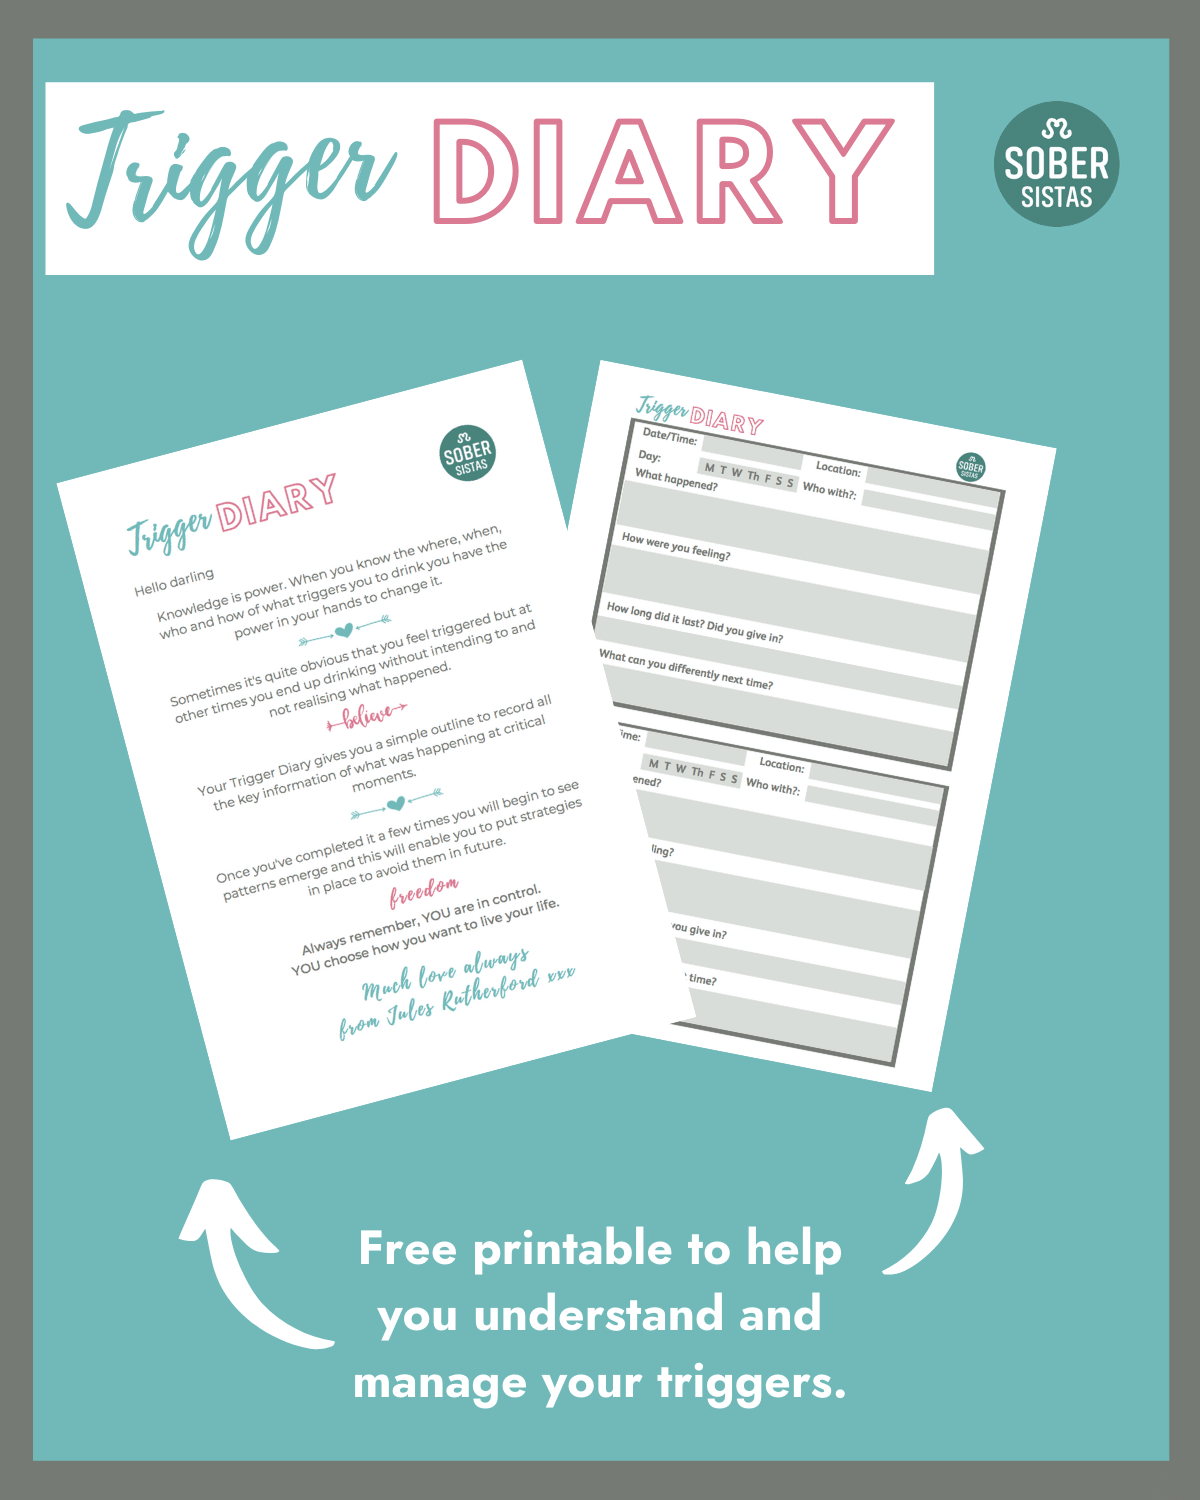 Copy of Trigger diary fb image